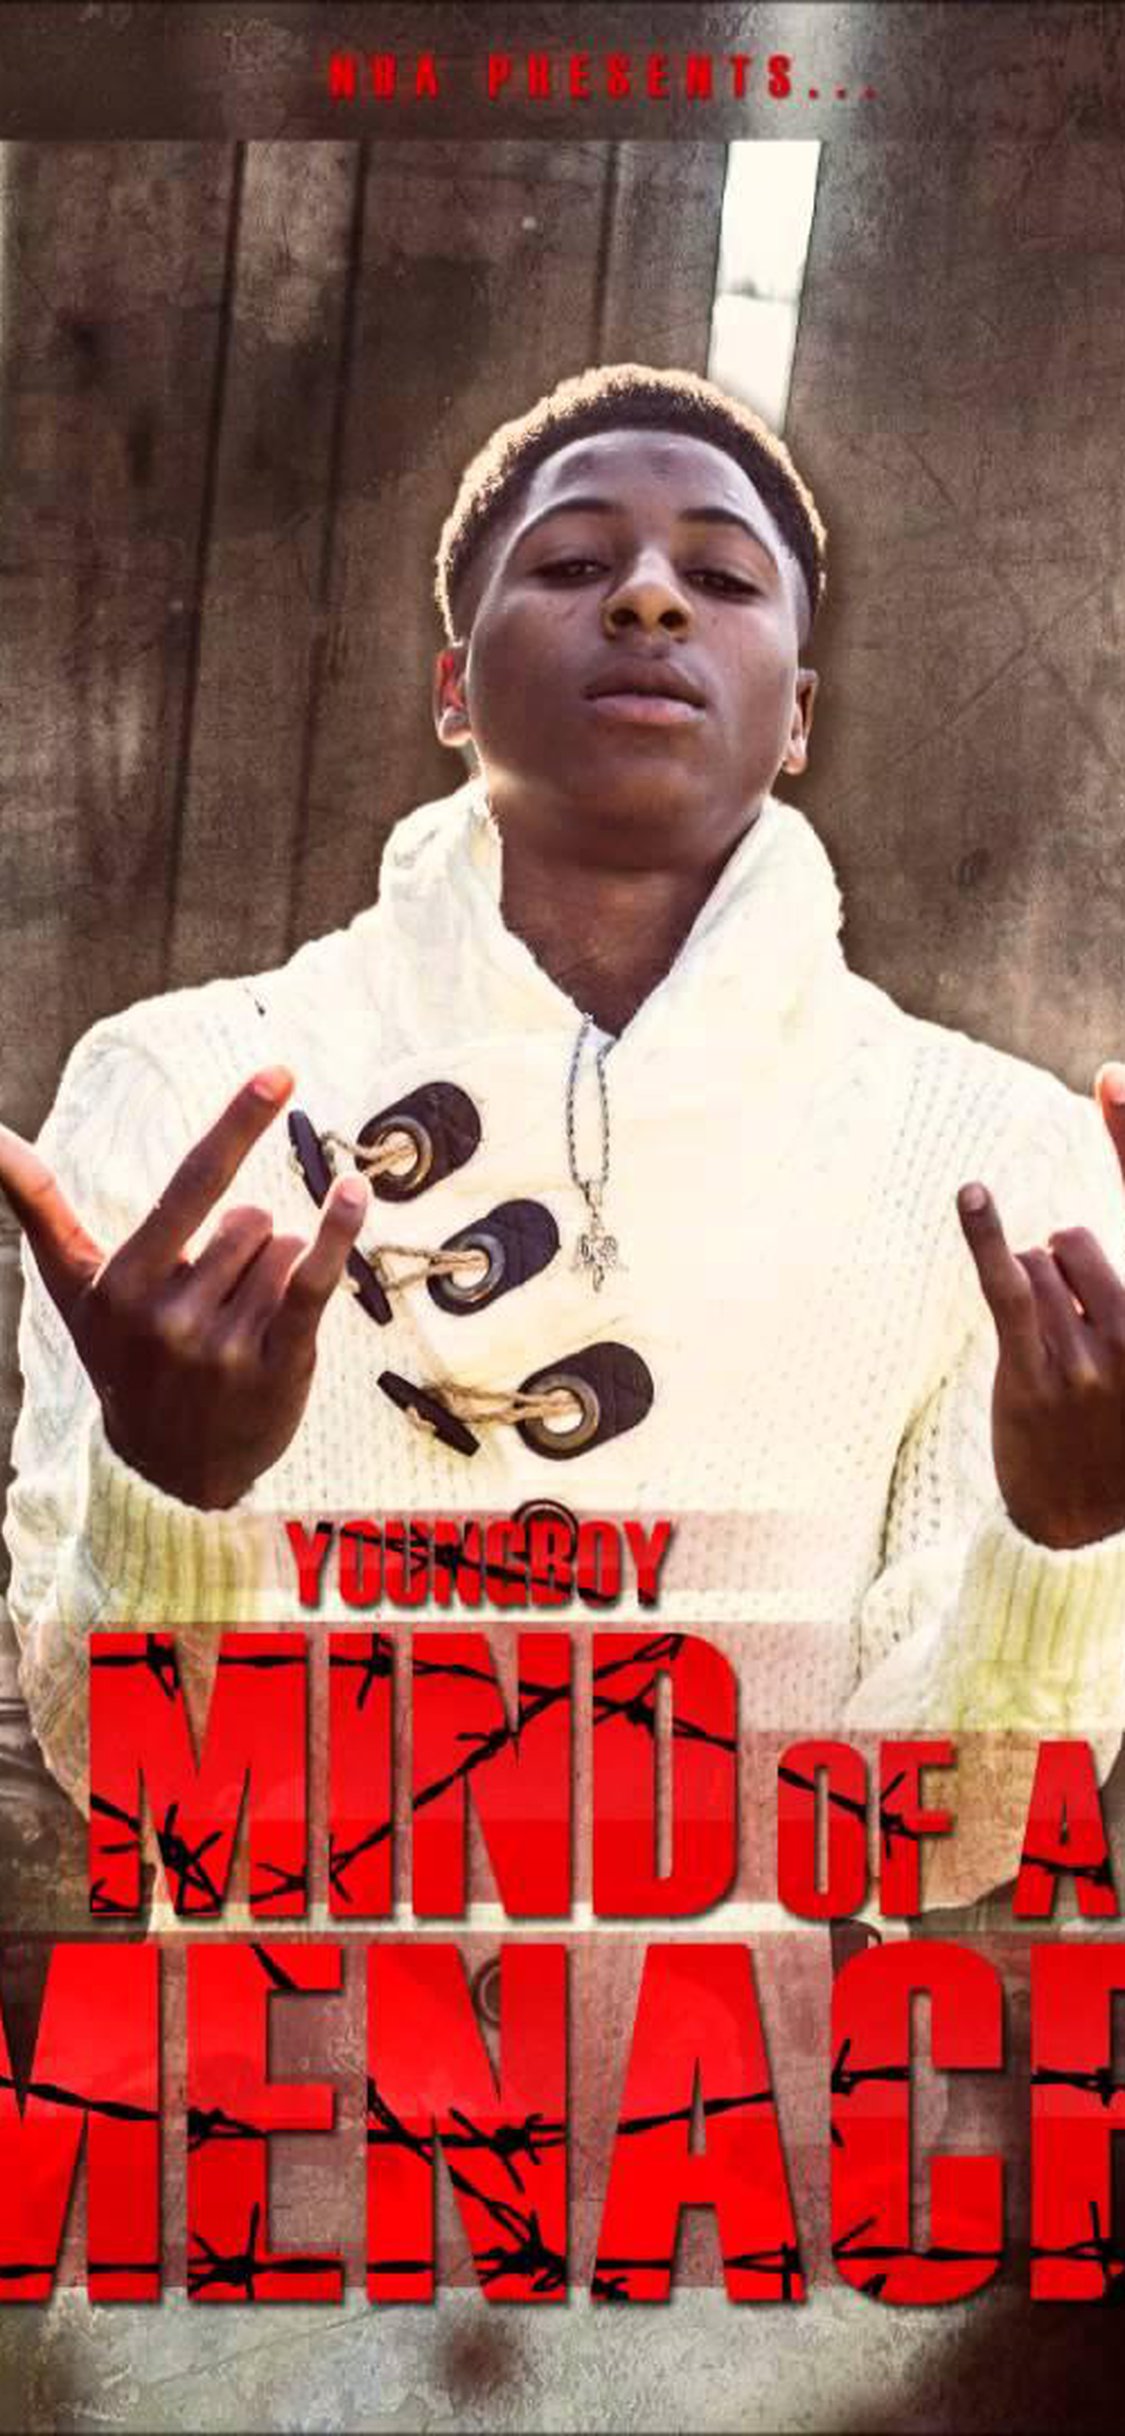 Download Nba Youngboy Rapper For Iphone X Wallpaper - Mind Of A Menace 1 , HD Wallpaper & Backgrounds